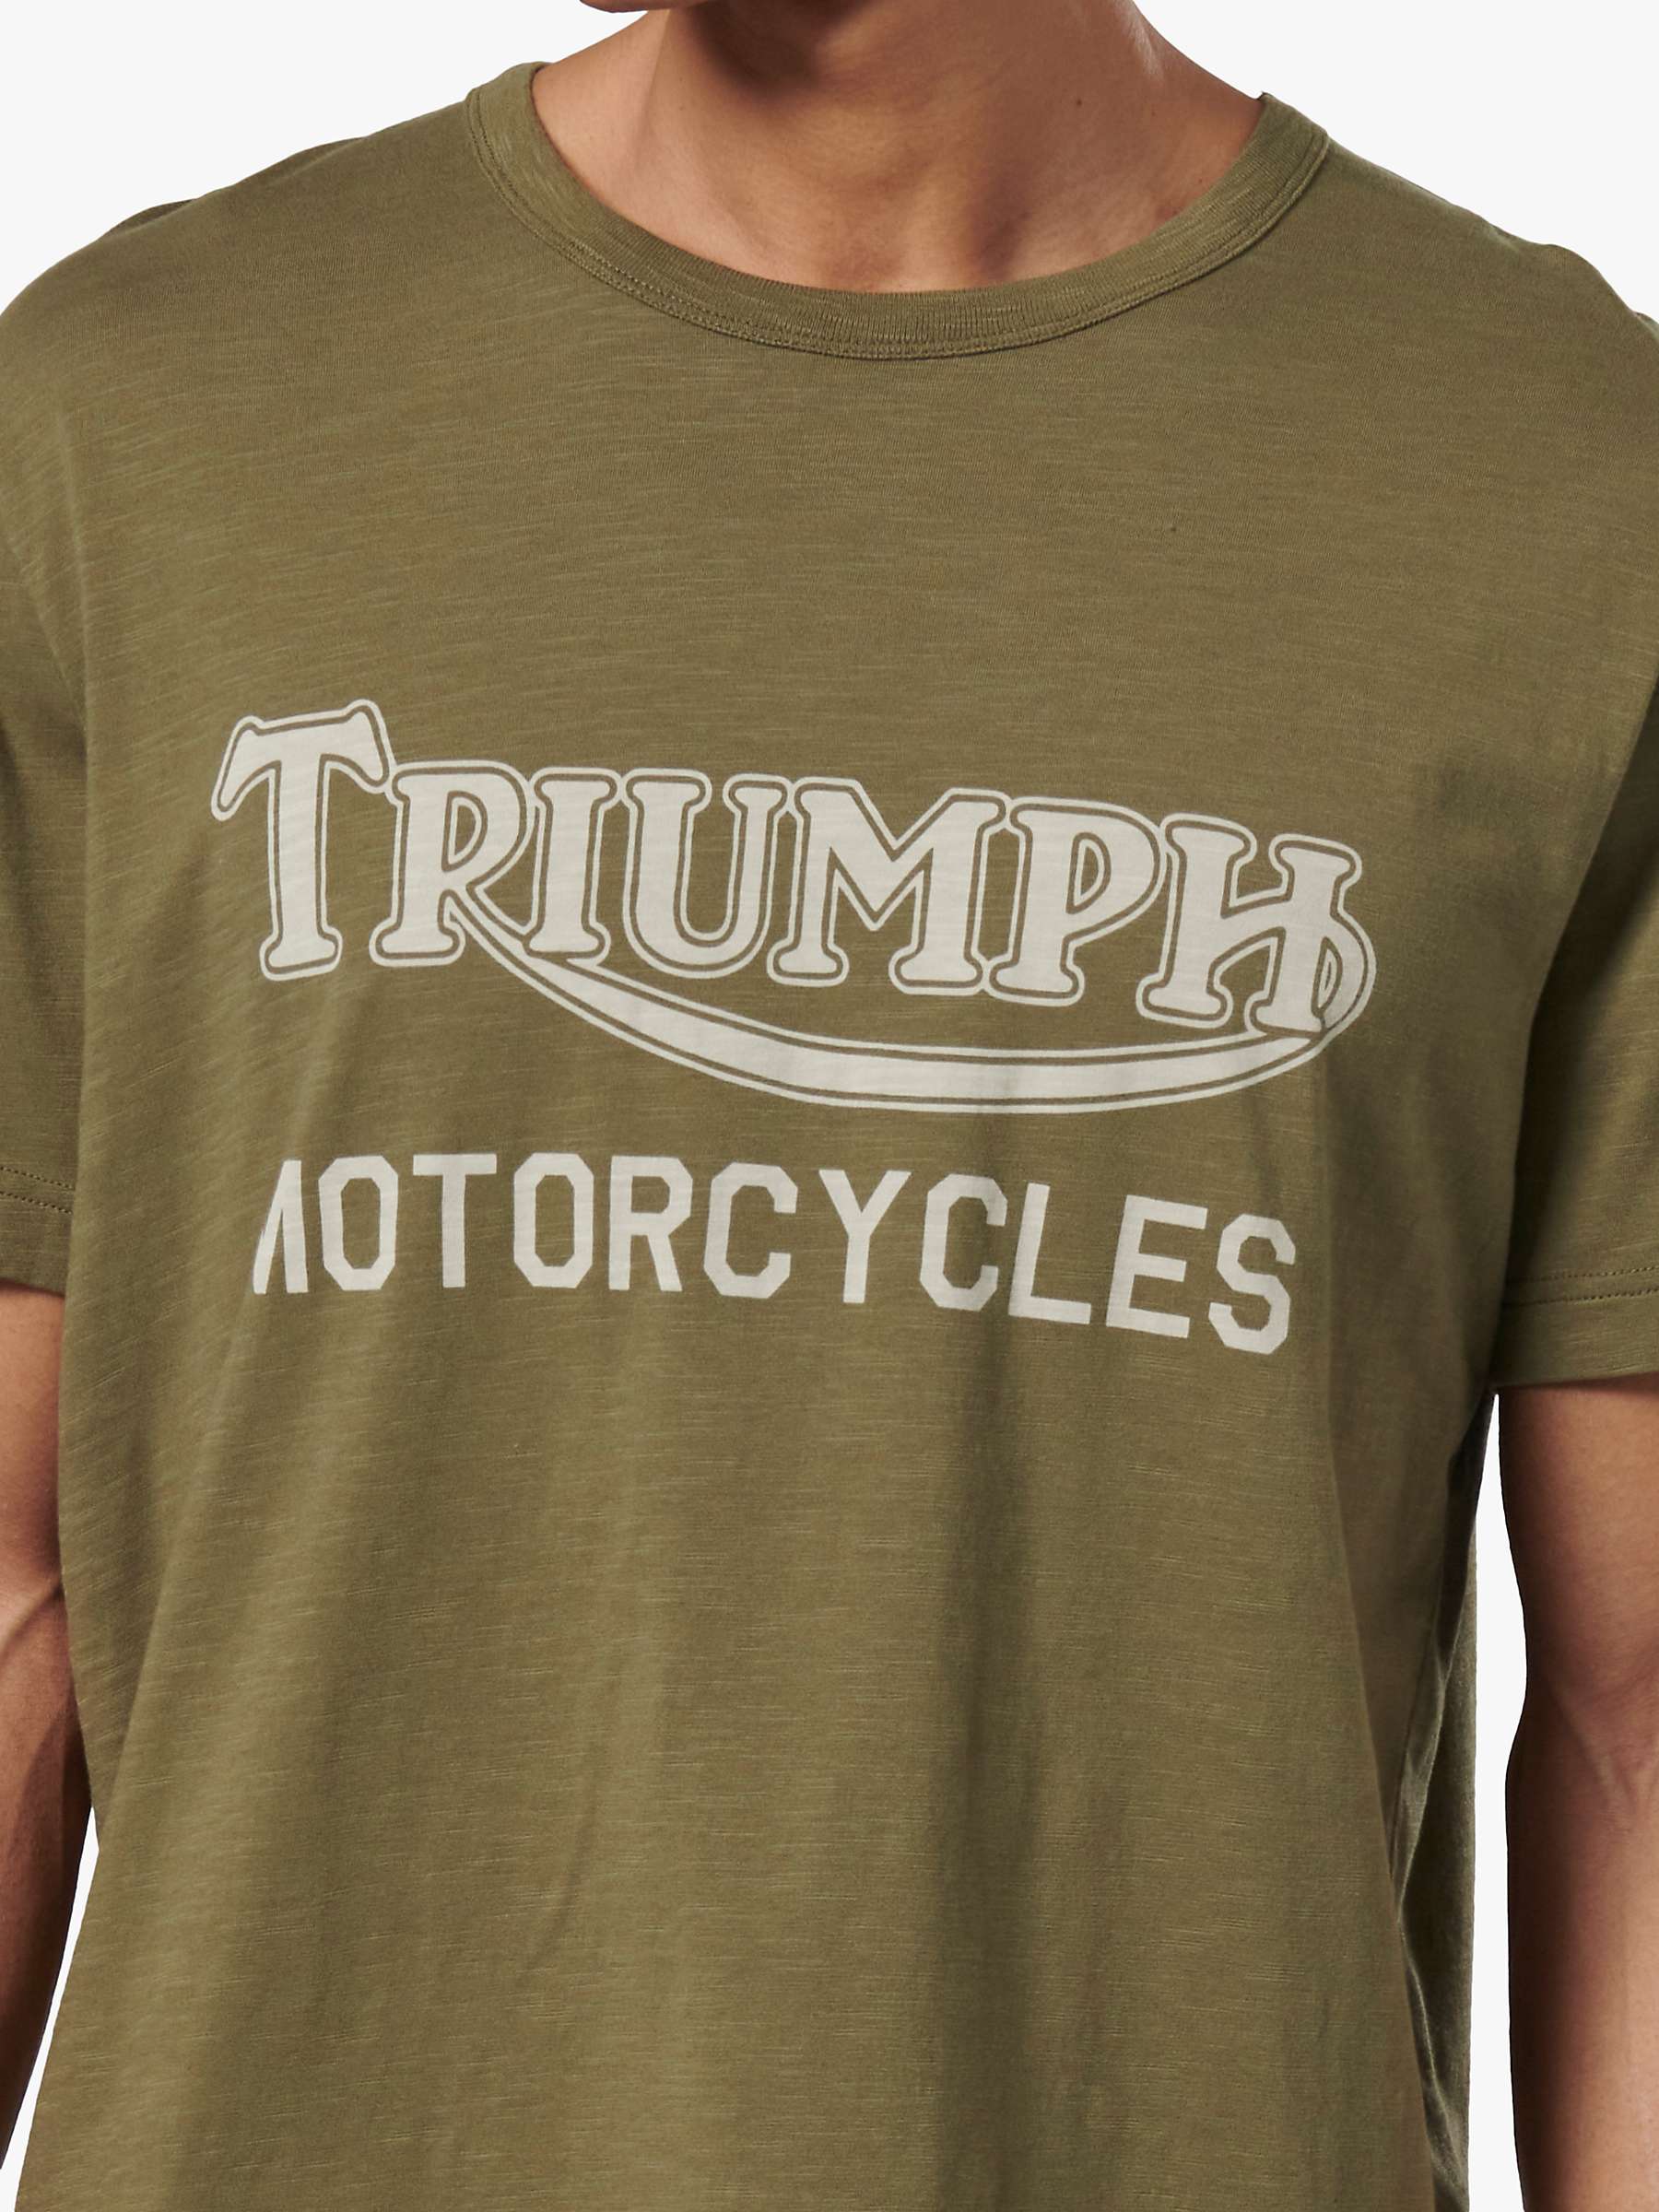 Buy Triumph Motorcycles Barwell T-Shirt Online at johnlewis.com